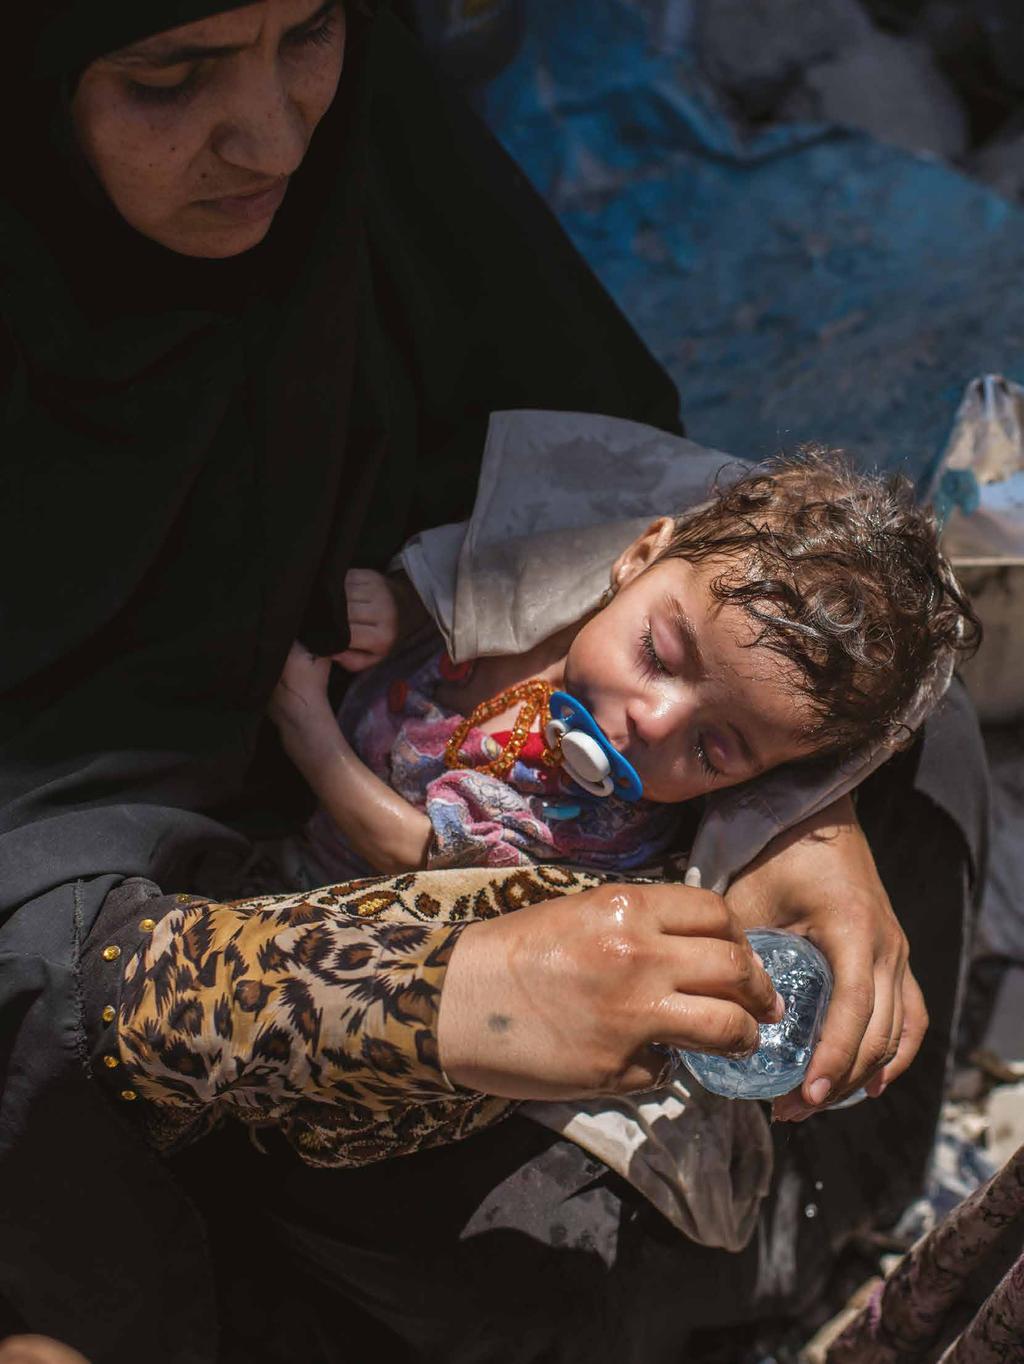 INTRODUCTION Iraq. People fleeing fighting in the old city of Mosul. A mother sprinkles water on her young child while fighting continues unabated in Mosul in June 2017.